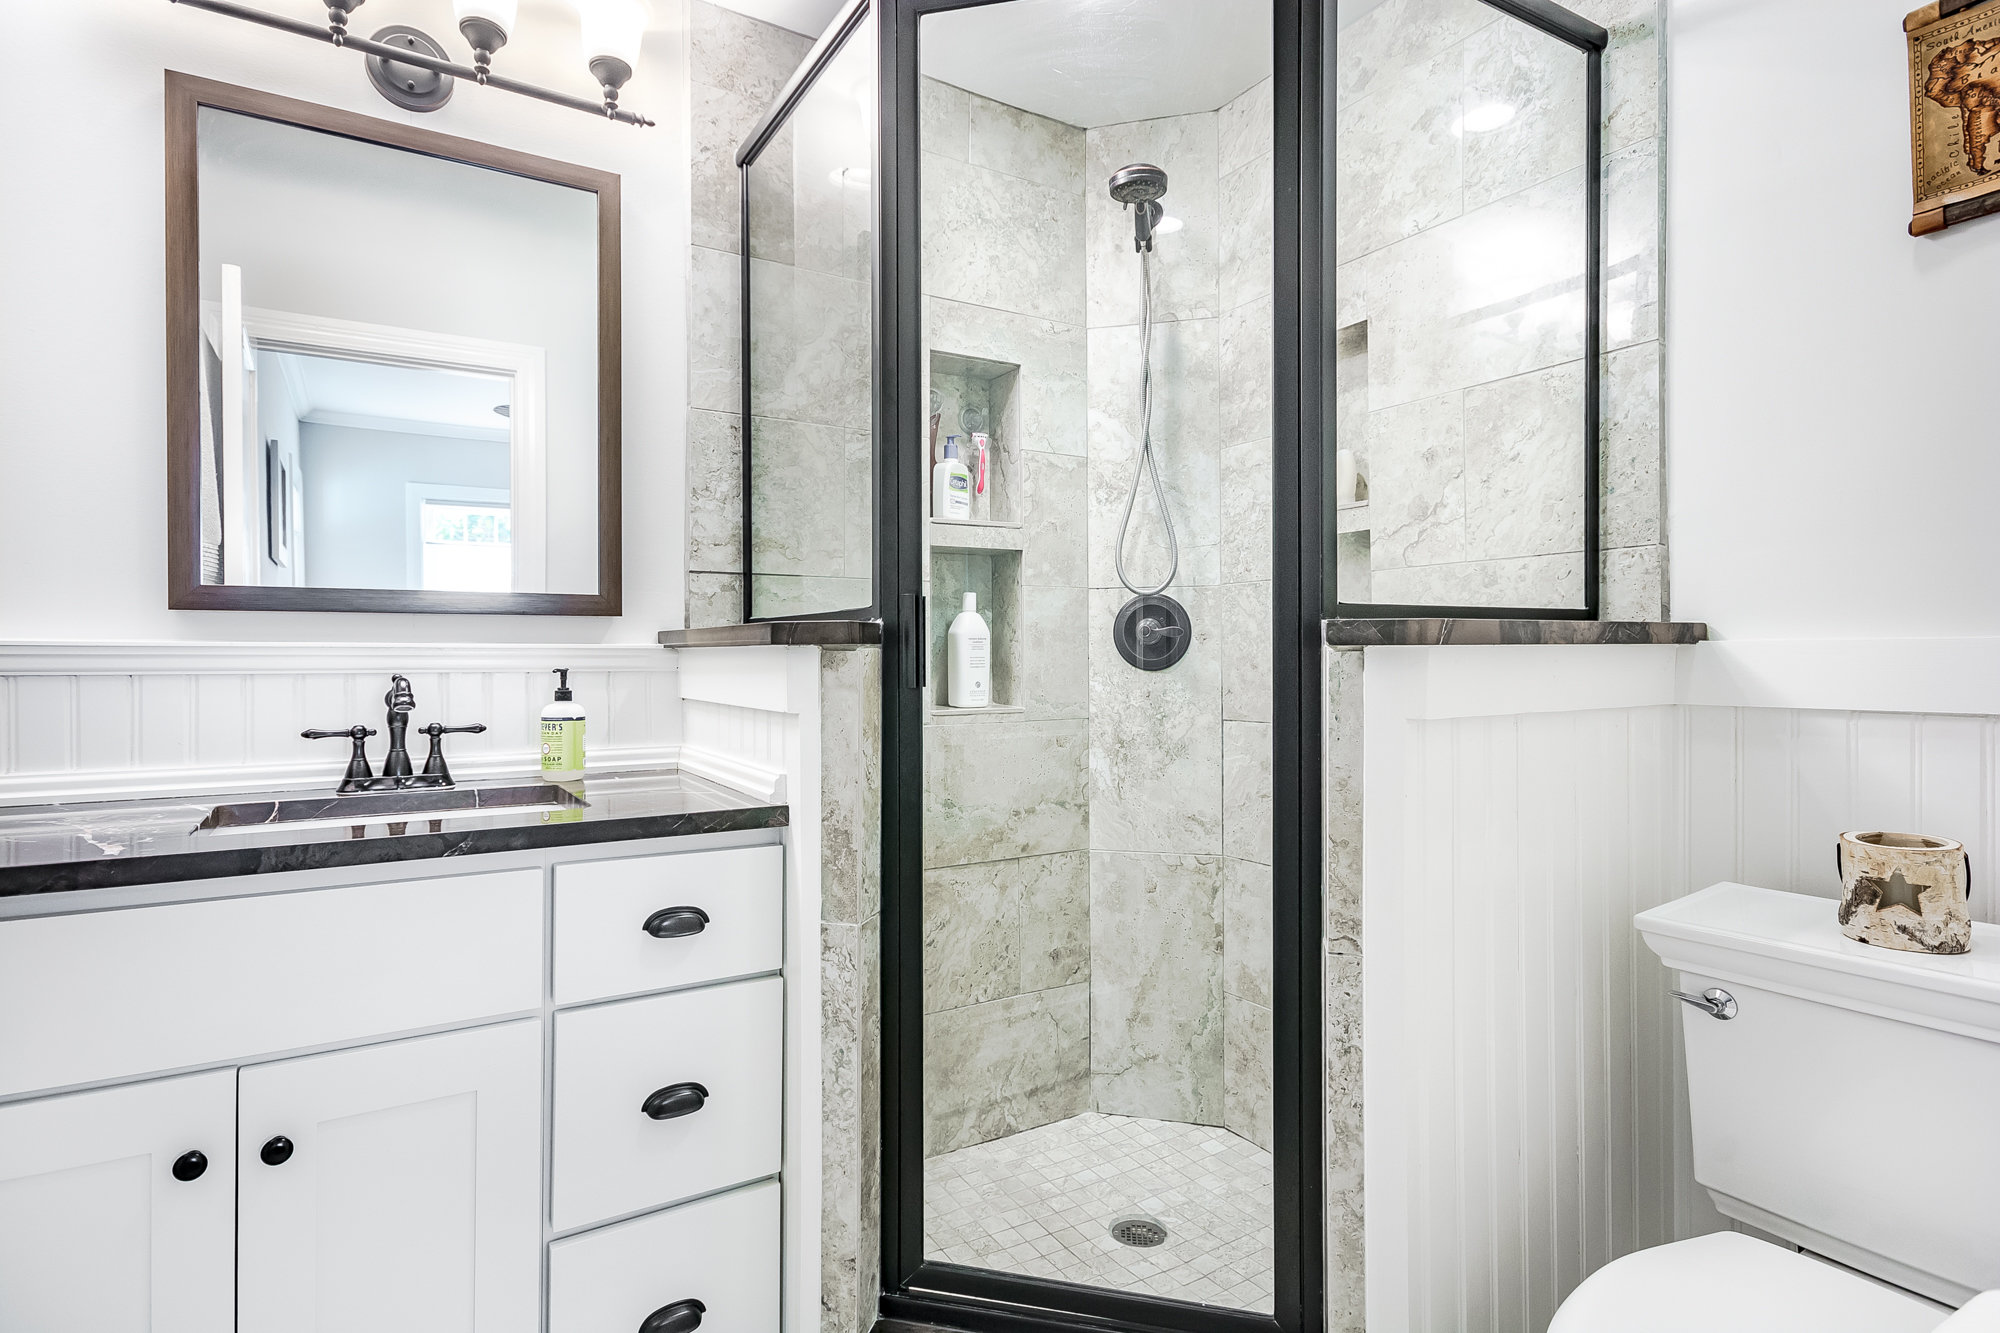 Master bathroom with stand-up shower